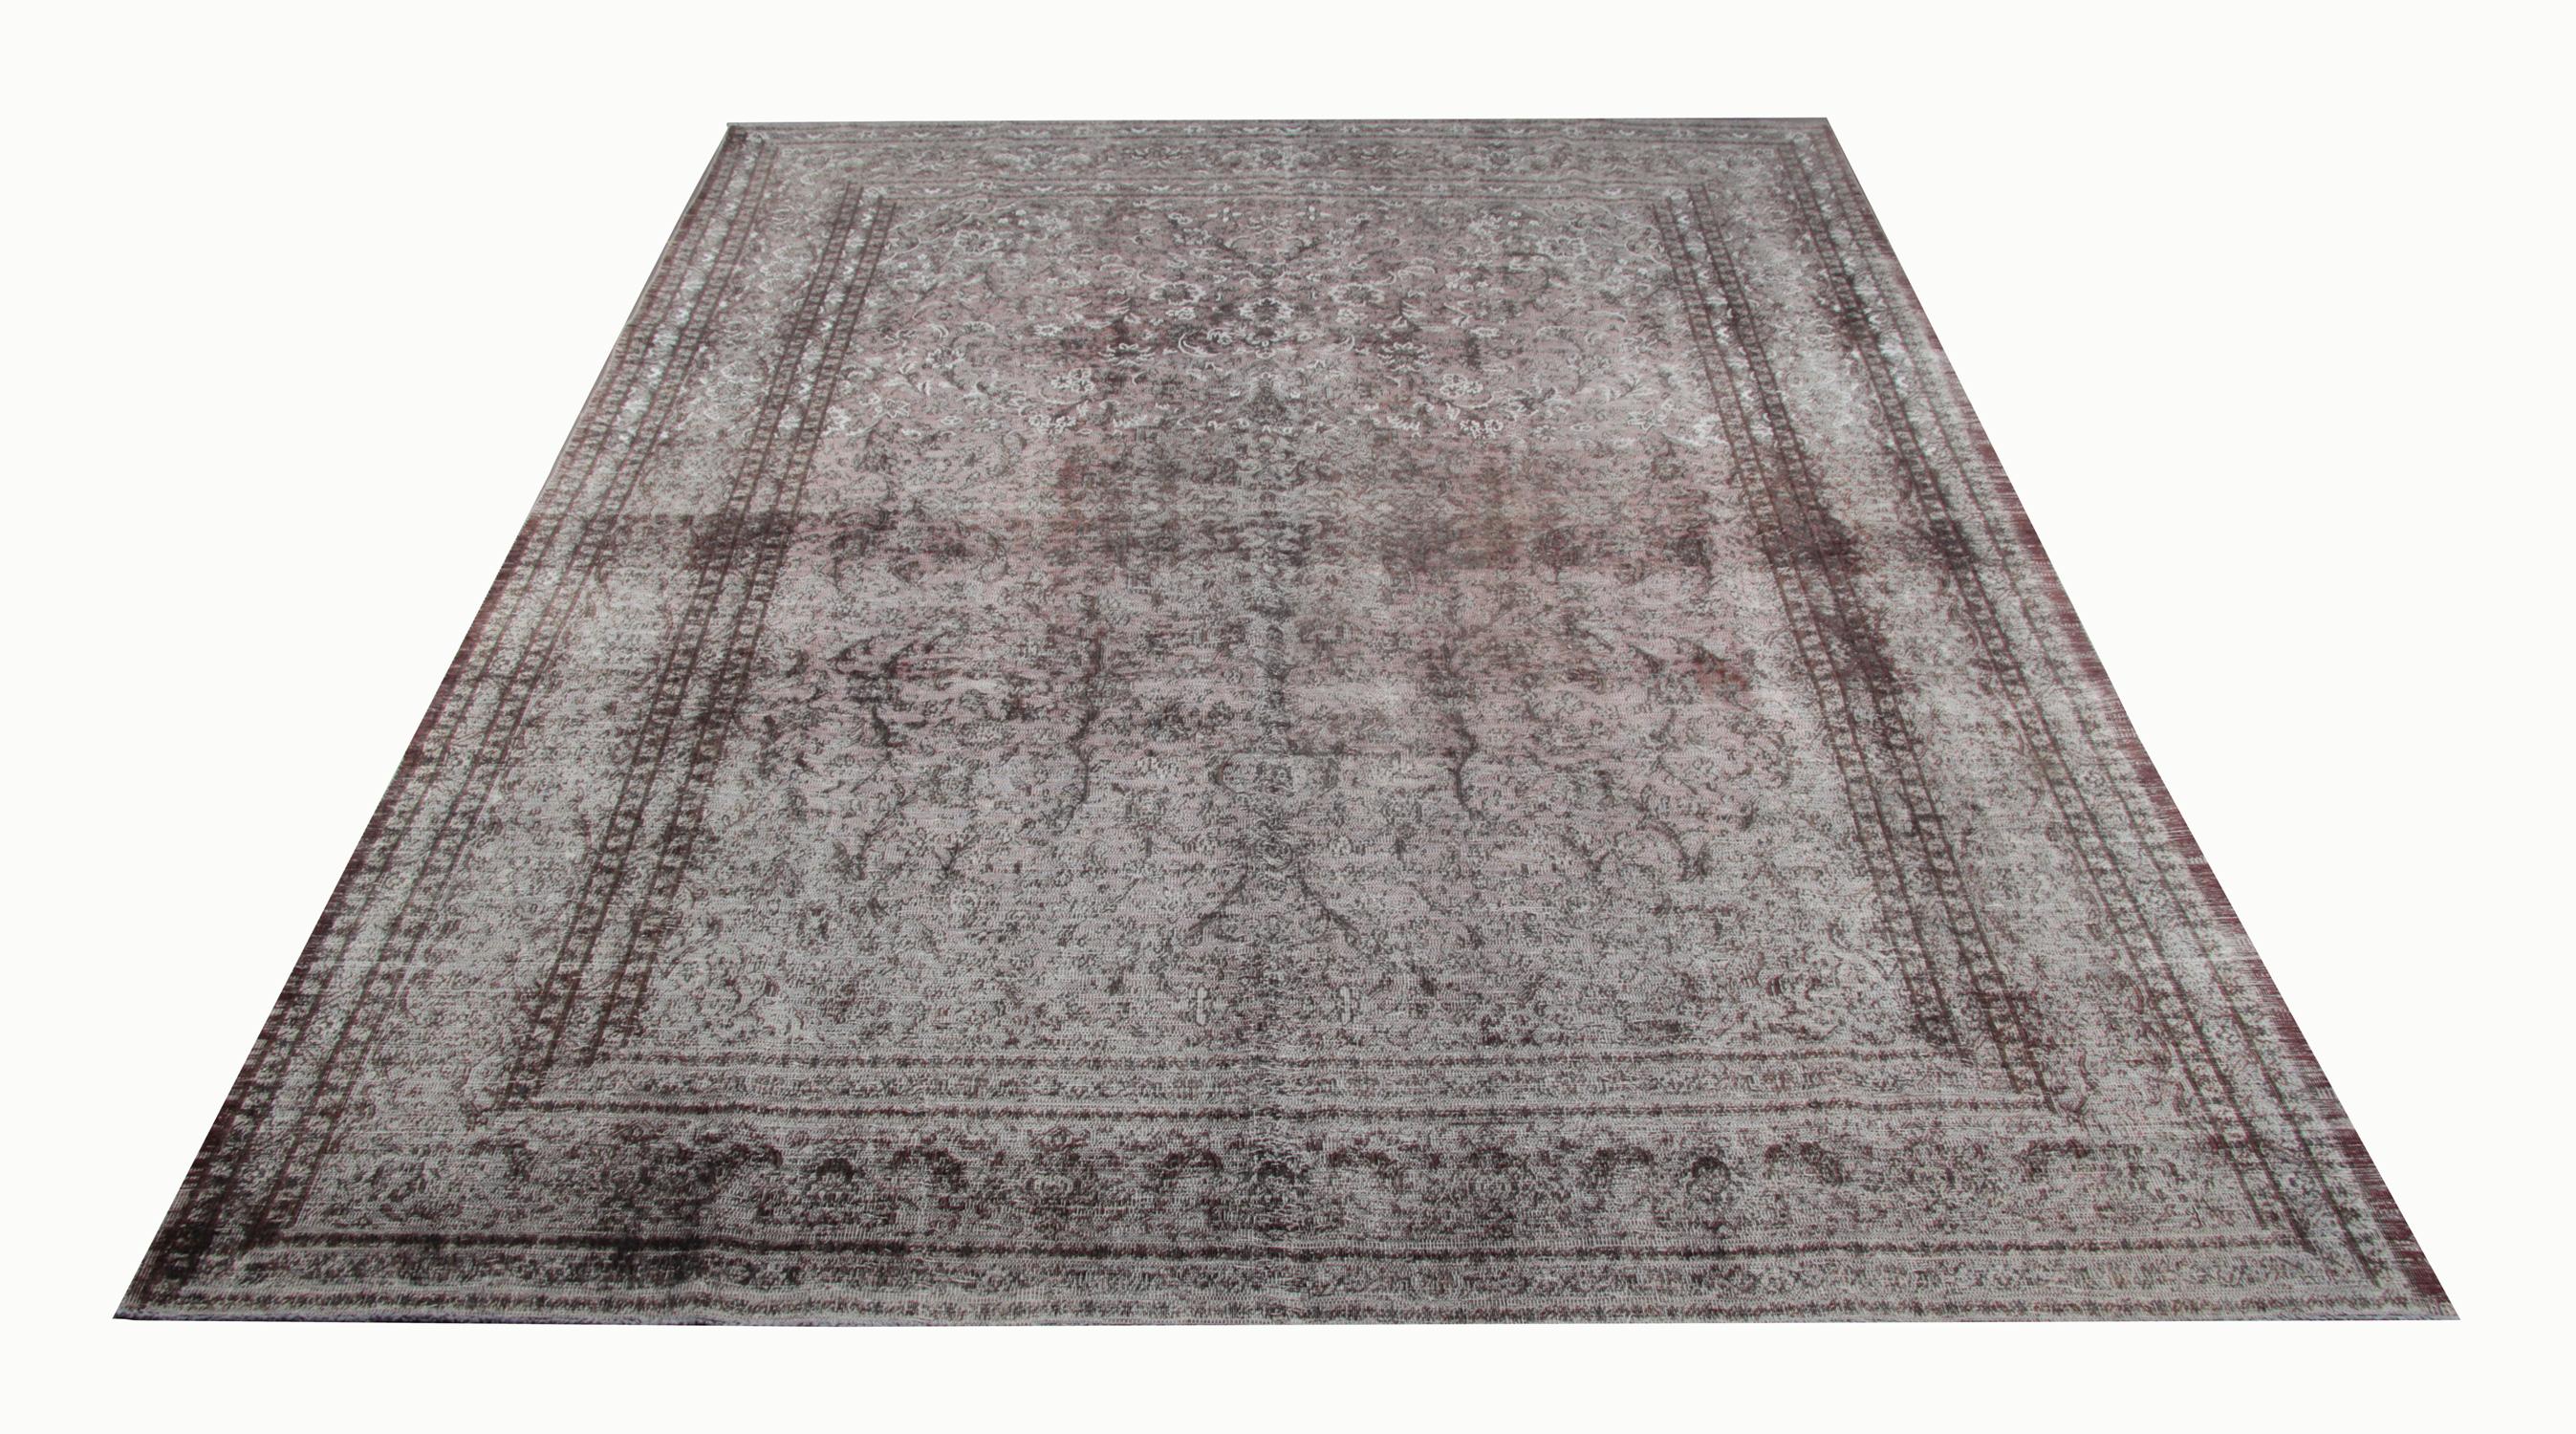 Distressed overdyed Persian style rug is one of the best choices as Home decor objects and this grey rug has been distressed and over-dyed to achieve modern rugs and Industrial Design in a singular coffee brown rug color. Vintage rugs 1960s. This